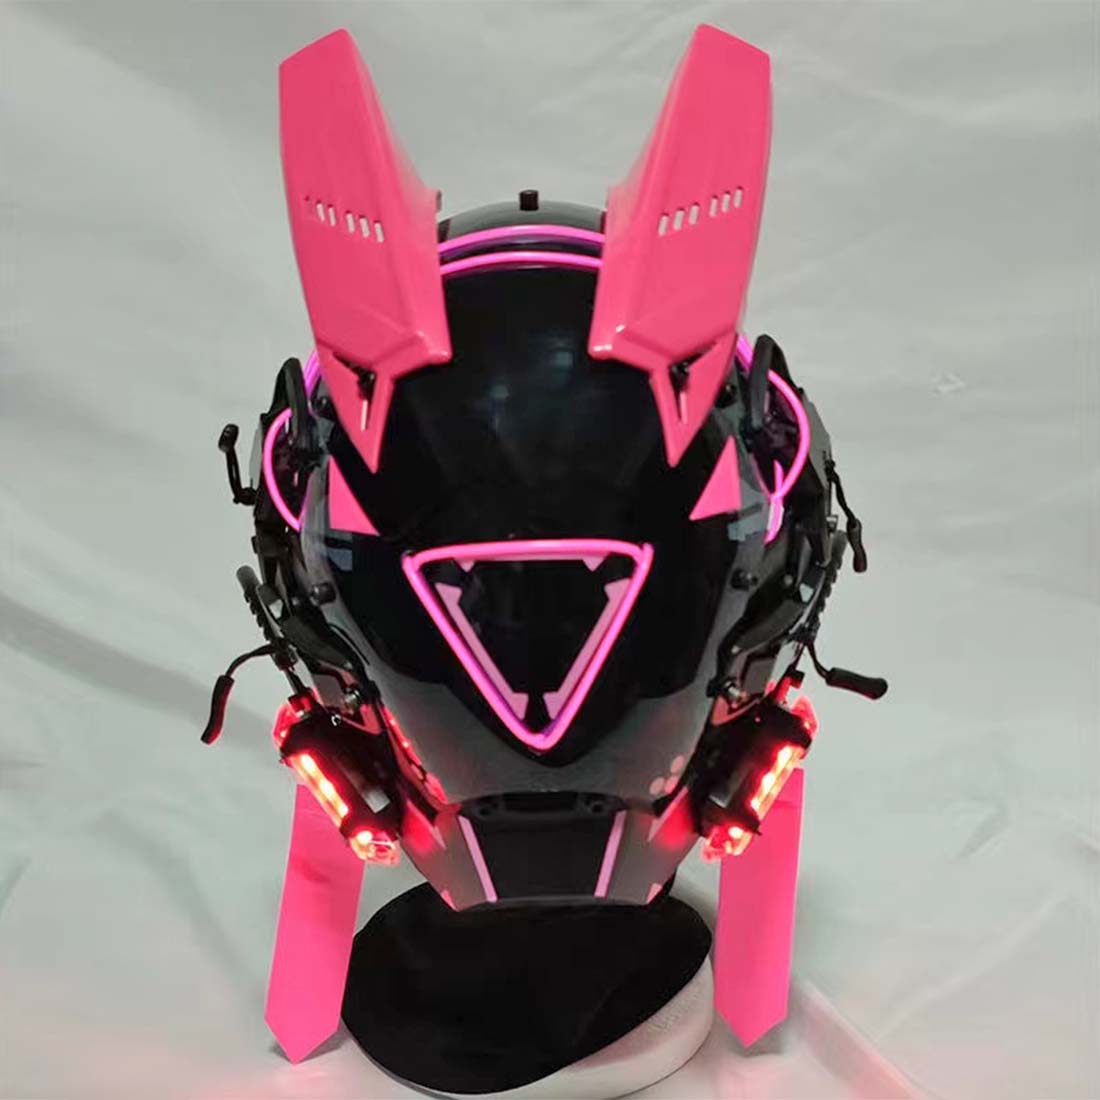 Punk Helmet with Horns Gothic Cyber Girl Cosplay Futuristic Mask